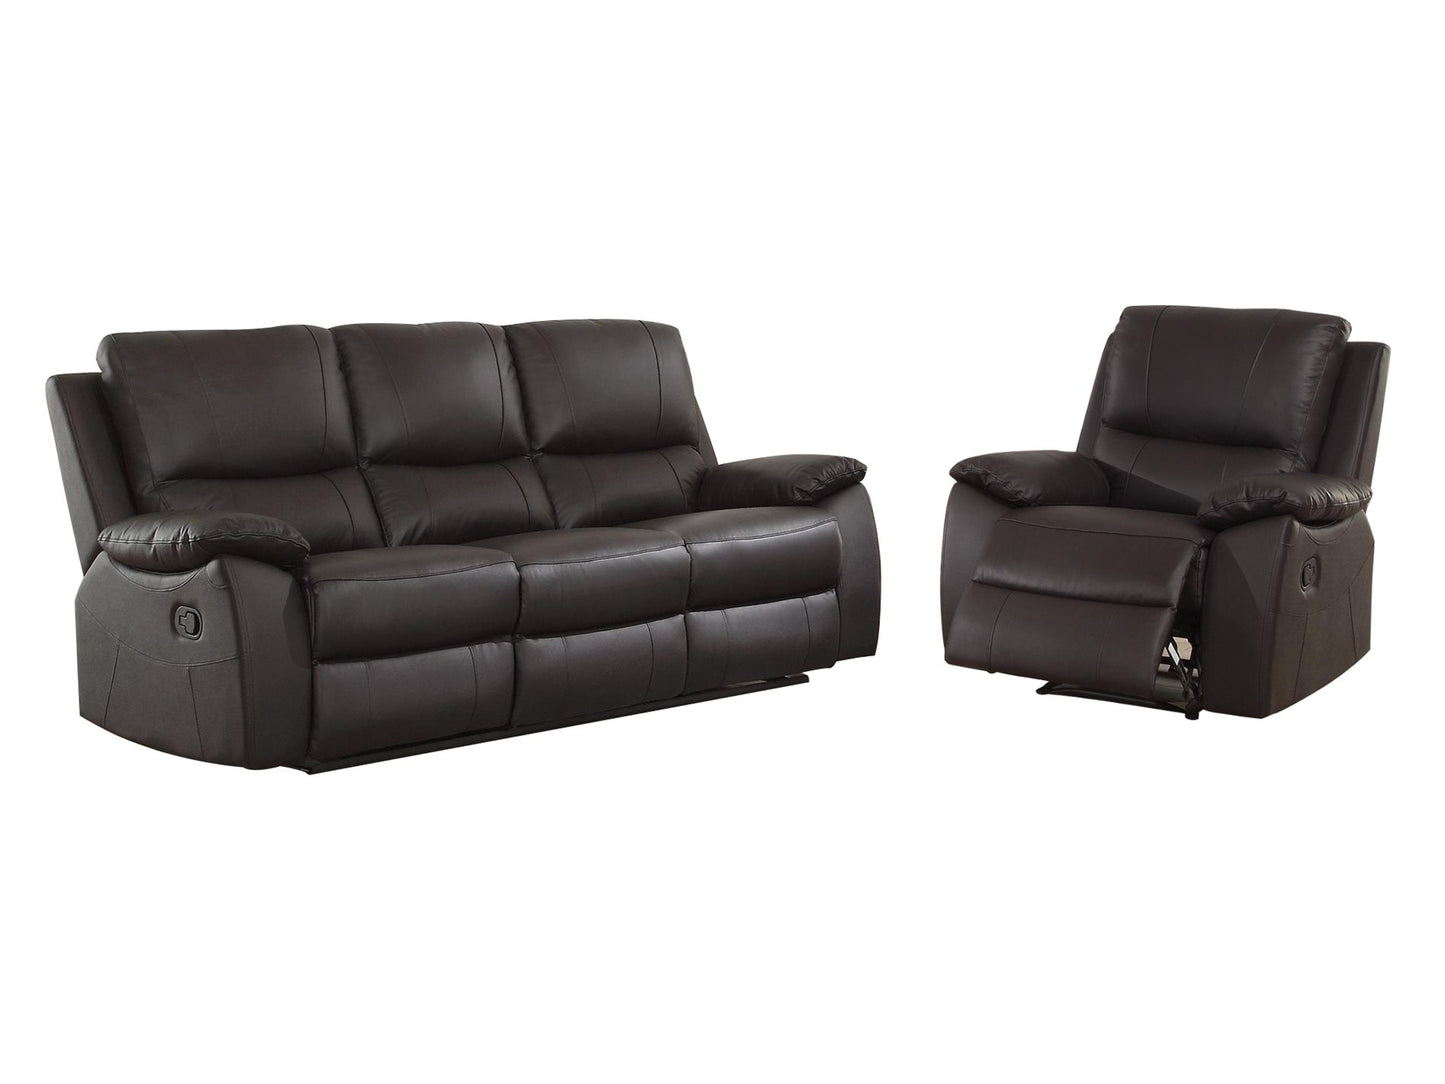 Homelegance Greeley 2PC Double Reclining Sofa & Recliner Chair in Brown Leather